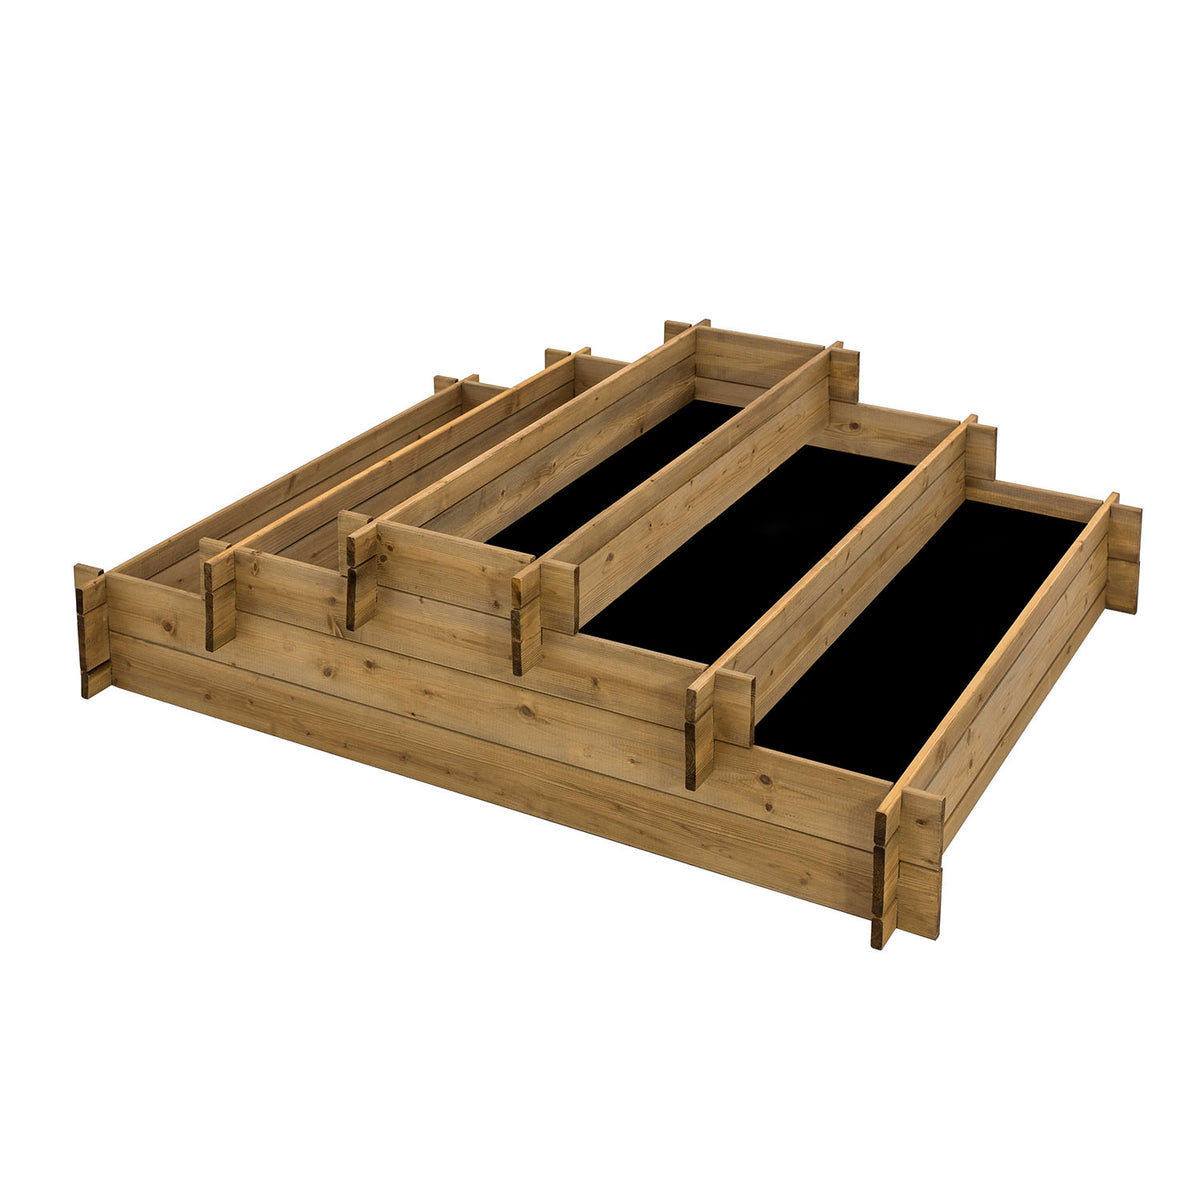 Tiered Five Section Raised Bed